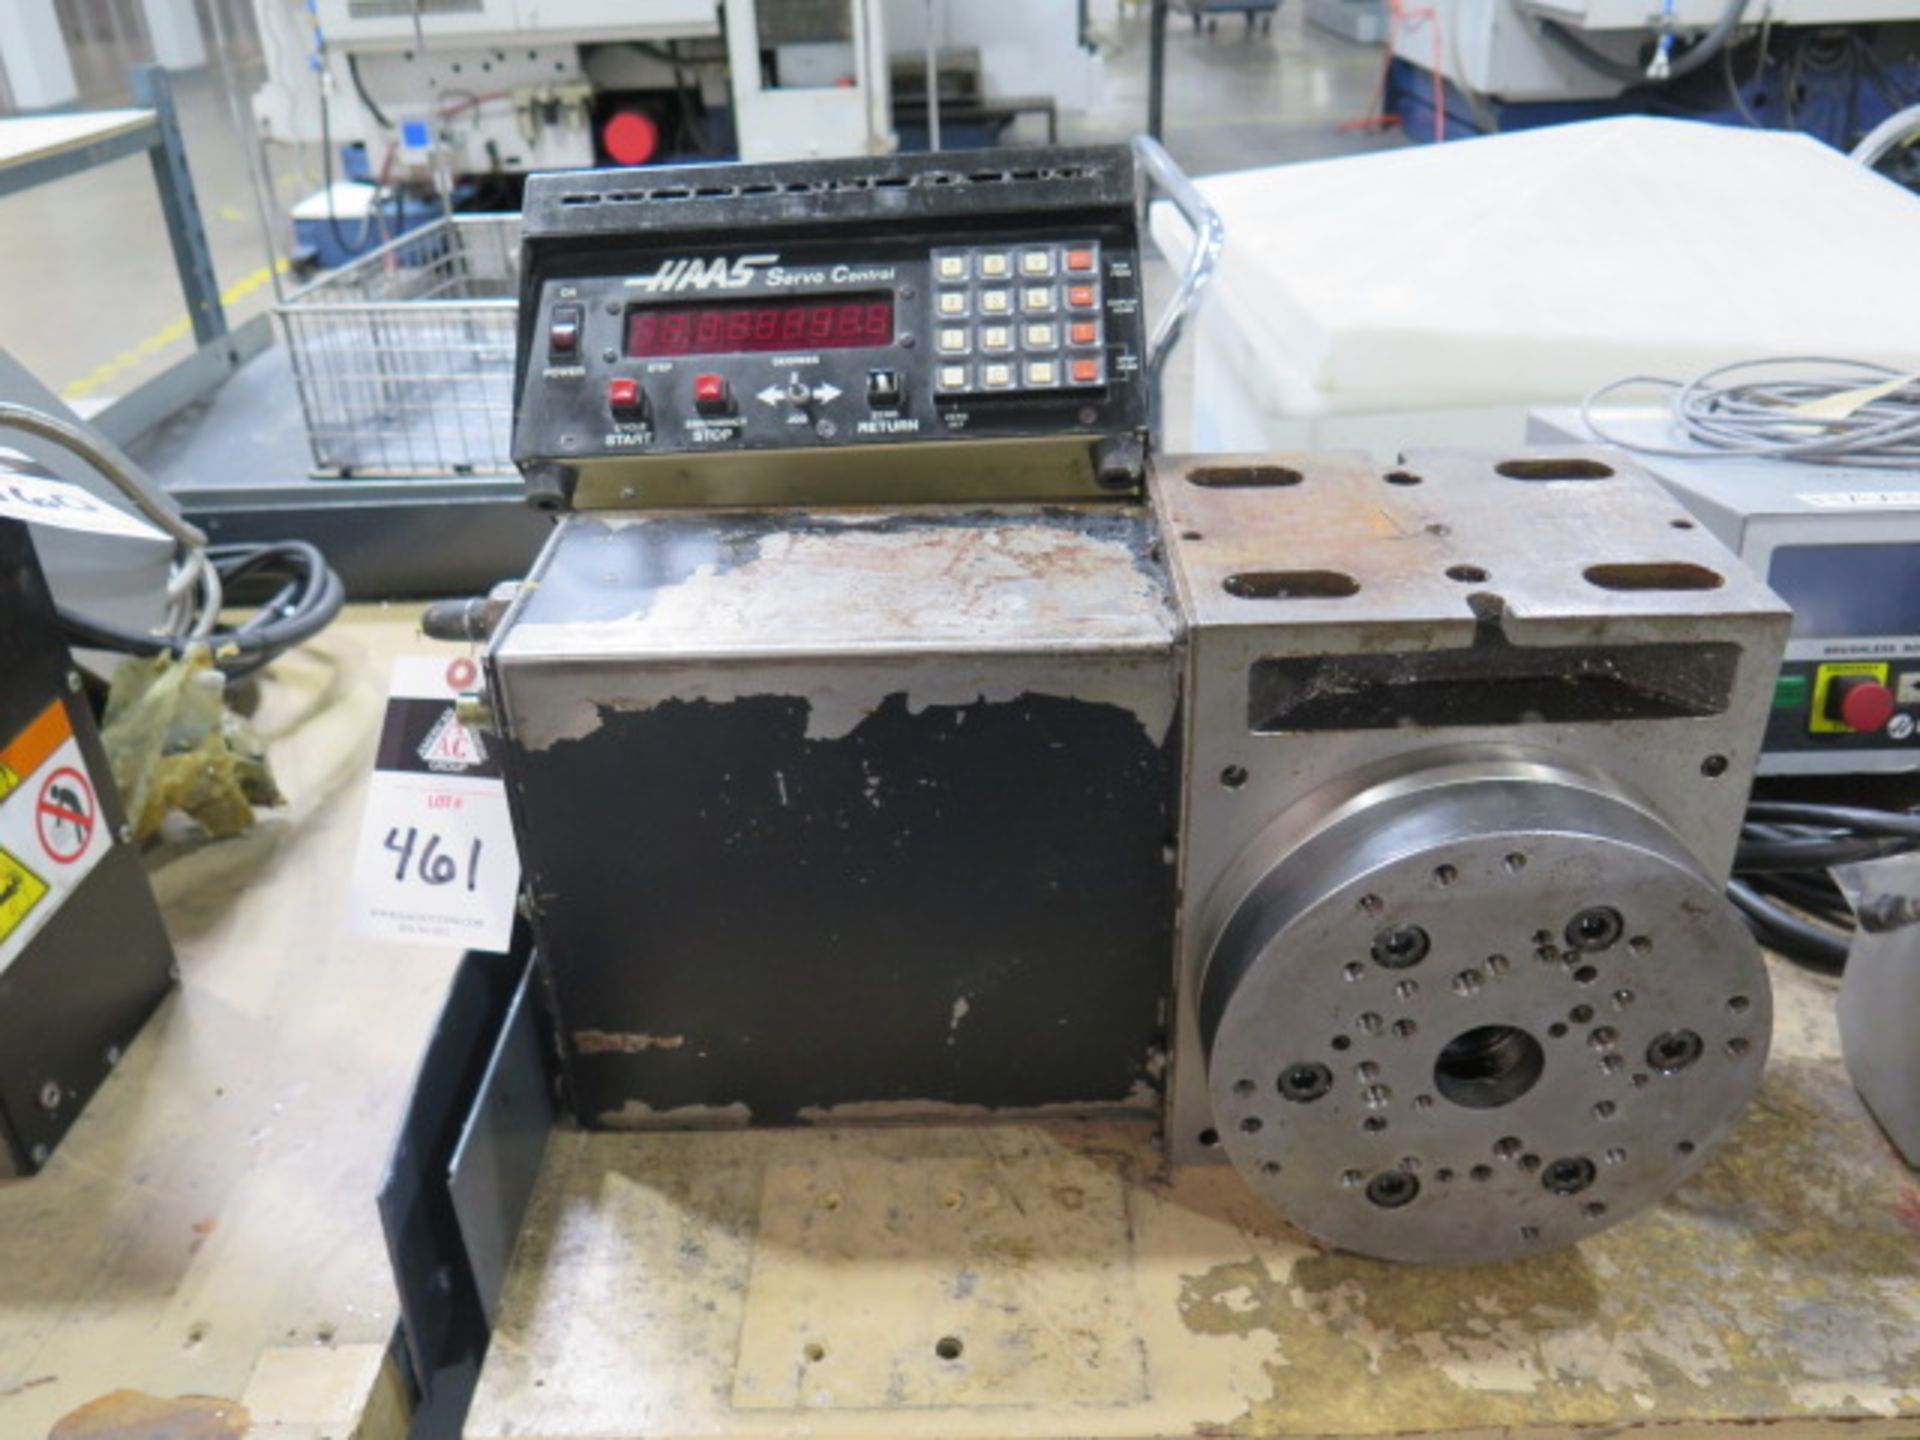 Haas HRT-210 4th Axis 8” Rotary Table w/ Haas Servo Controller (SOLD AS-IS - NO WARRANTY)